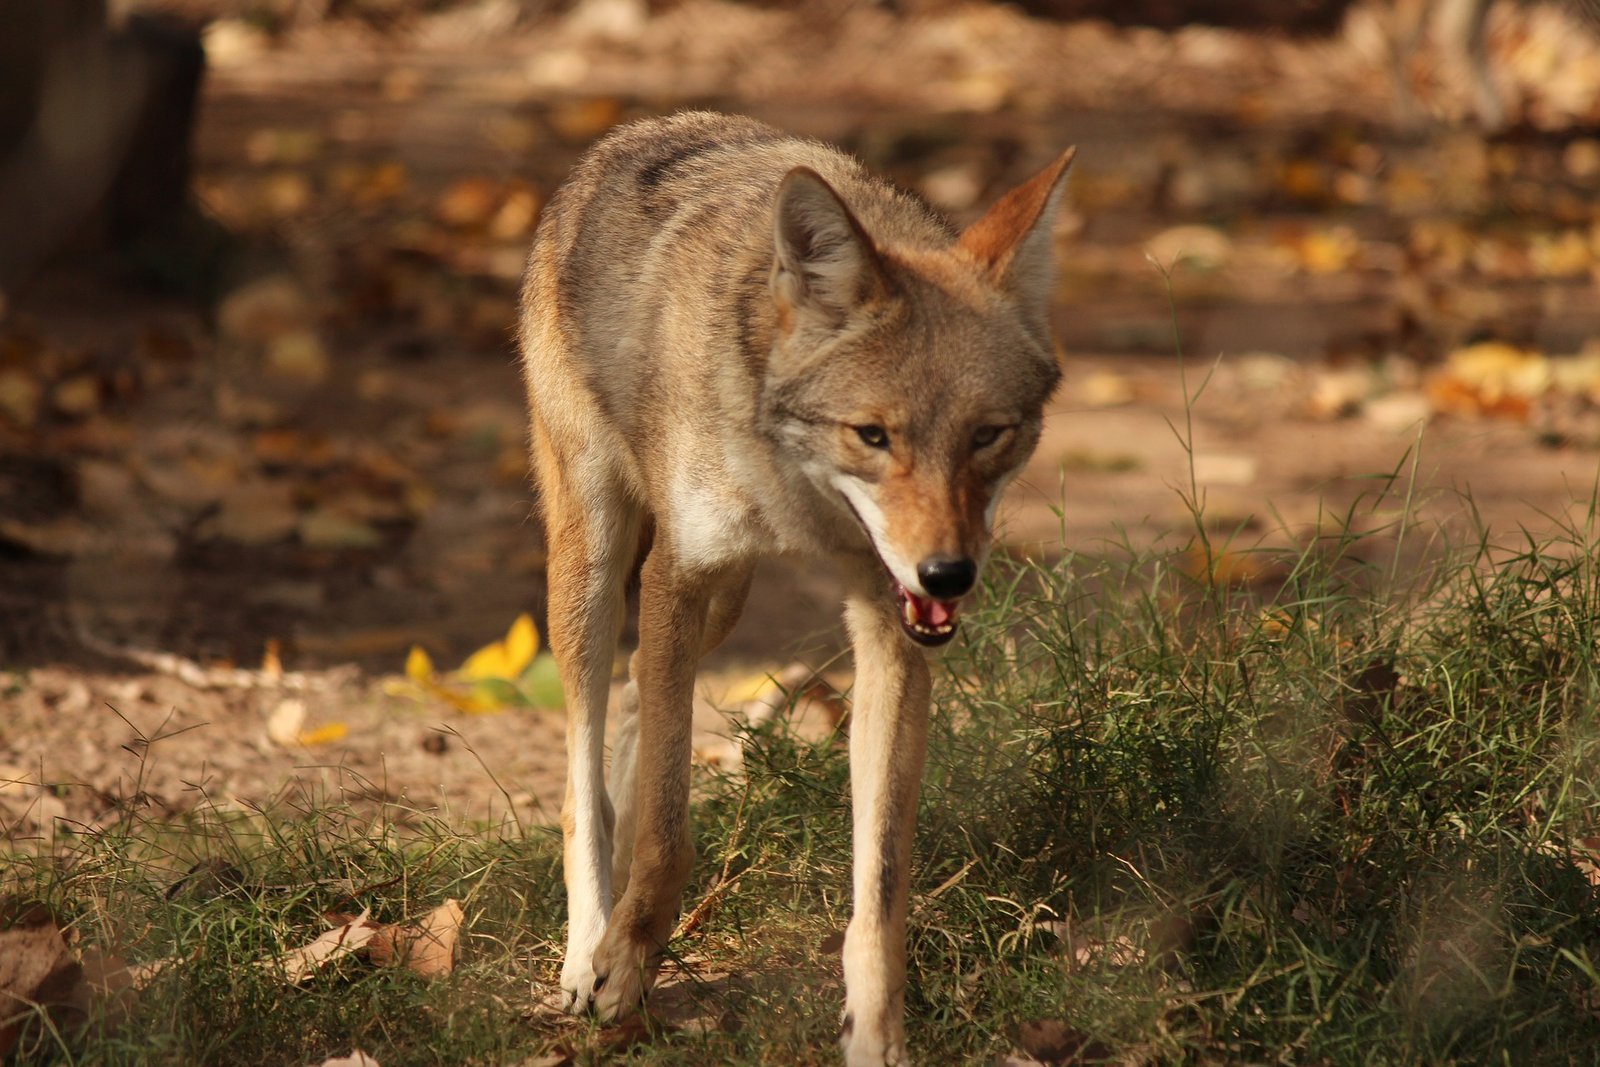 Image of a north American desert coyote